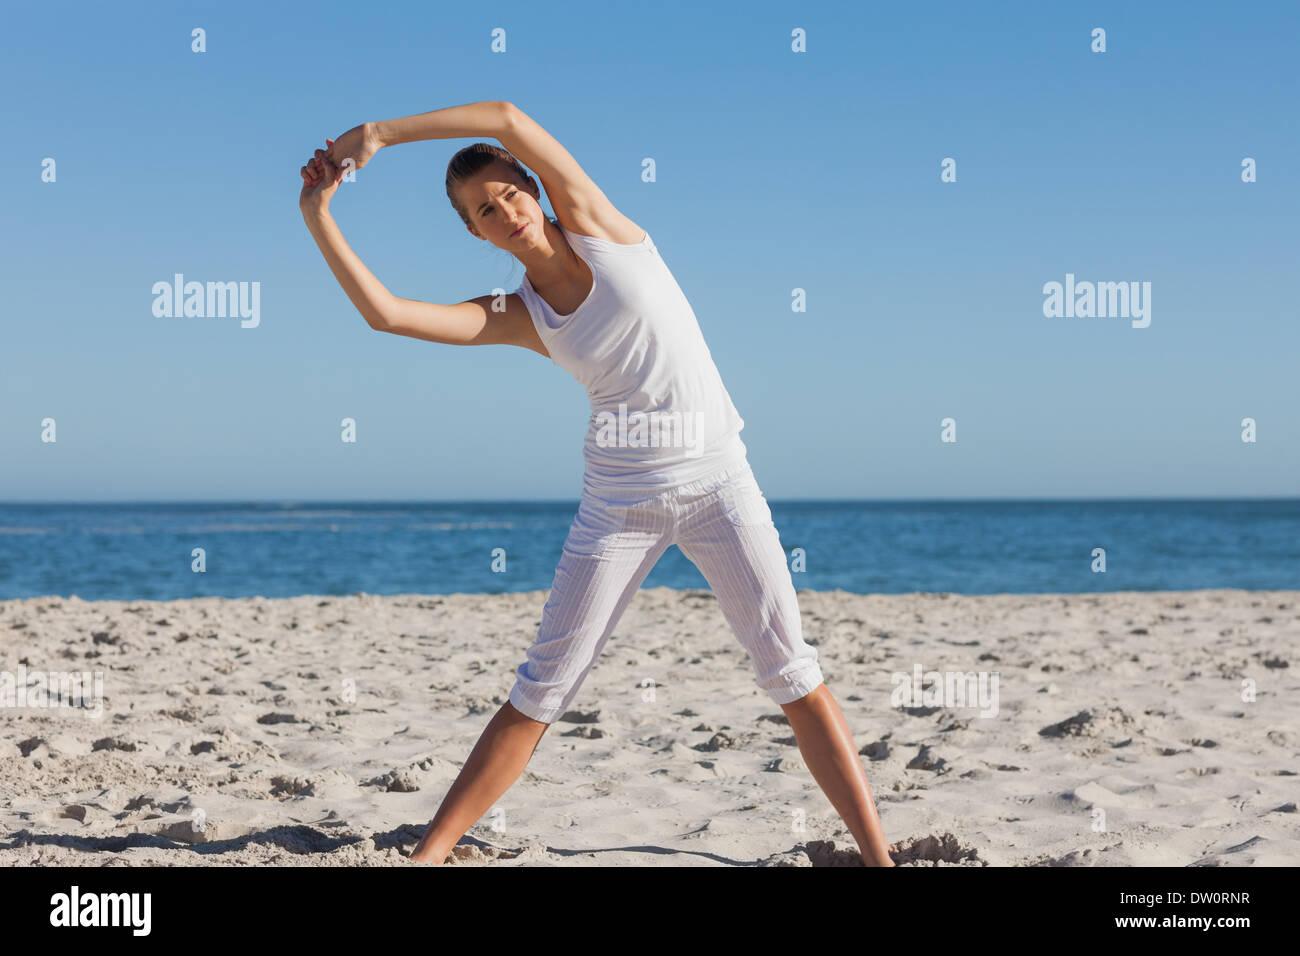 Woman stretching in yoga pose Banque D'Images